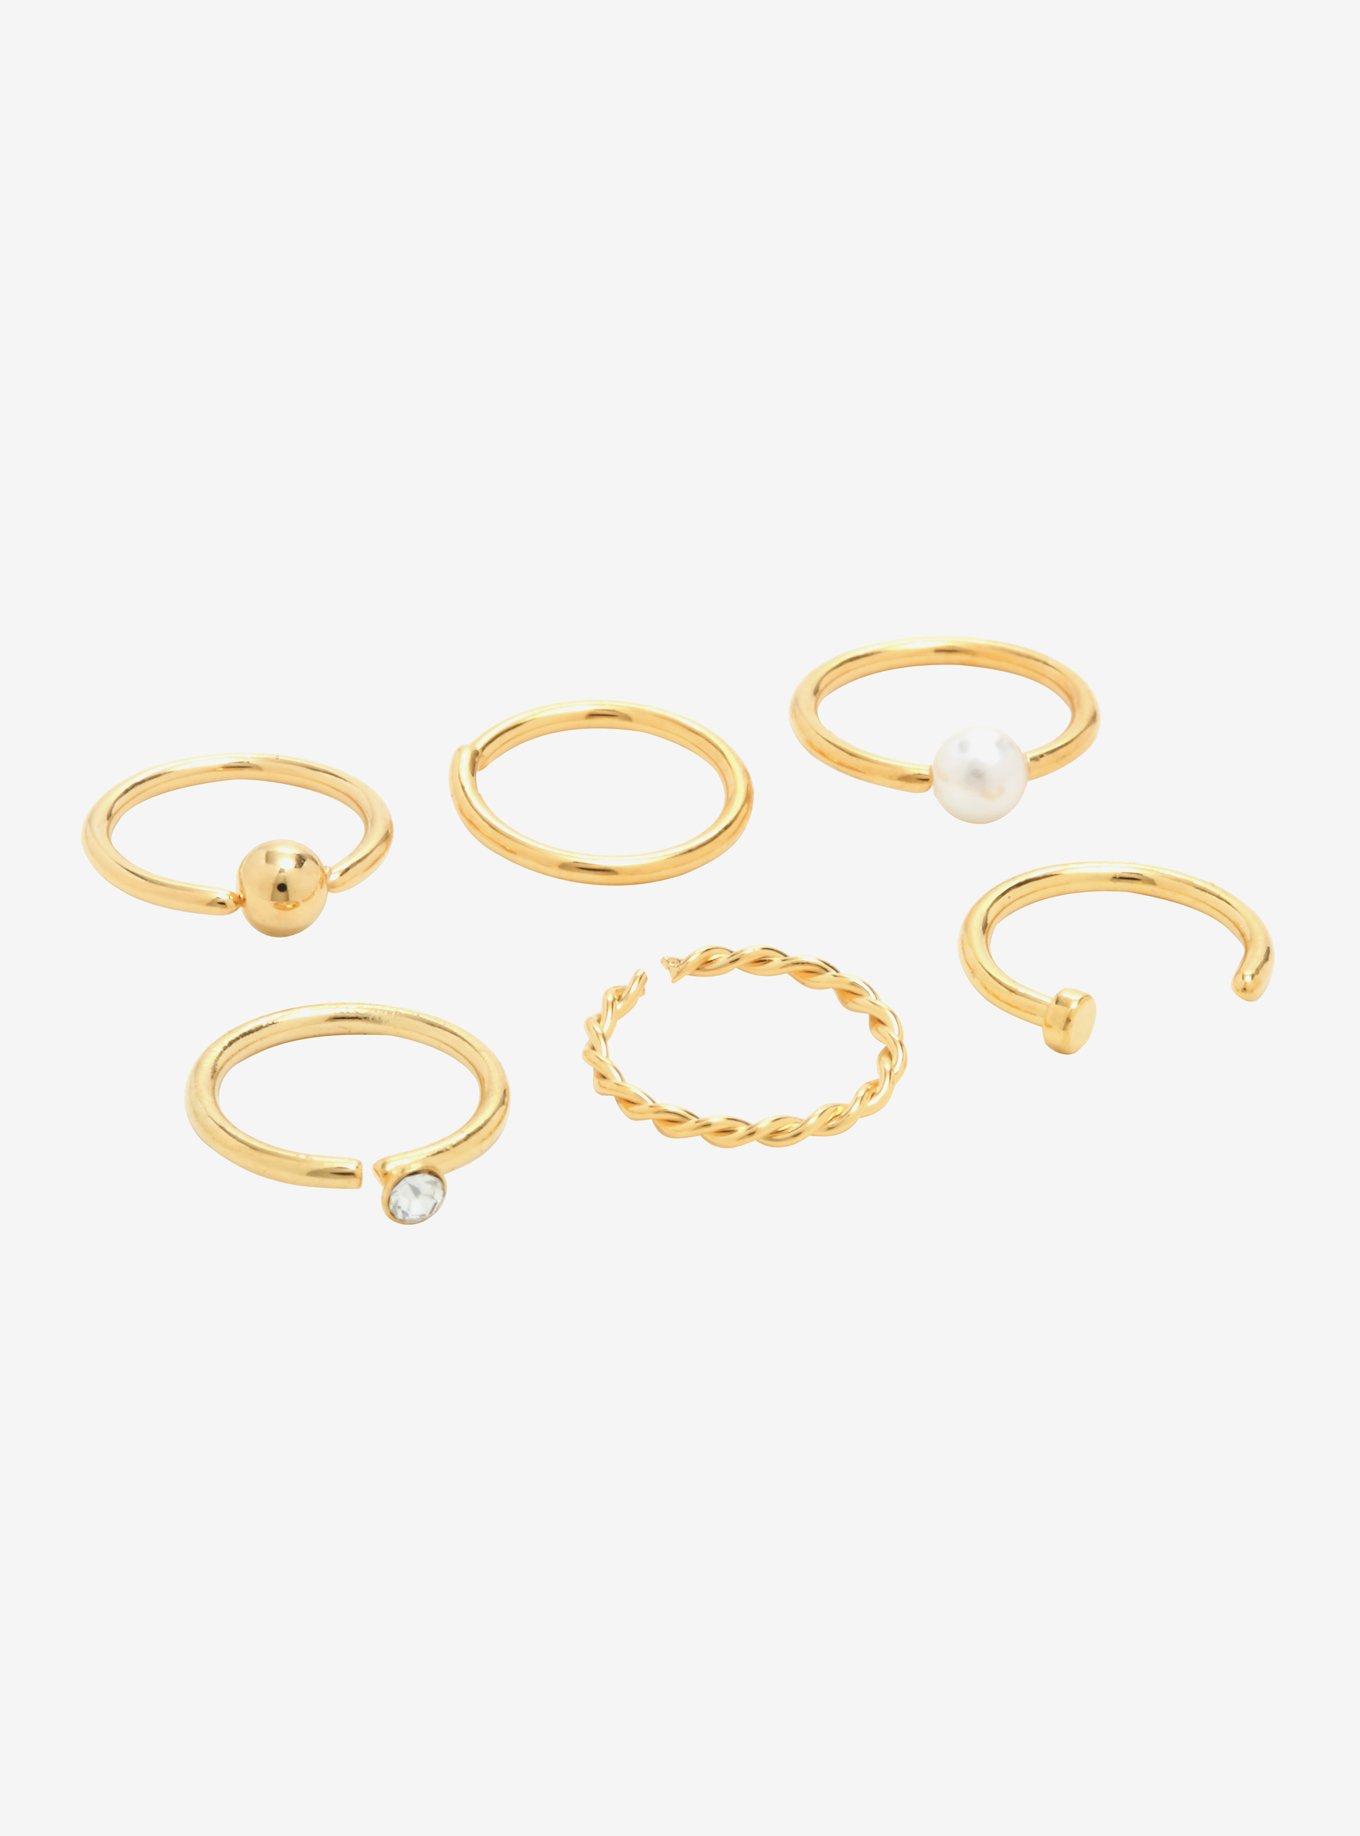 Gold Tone With Pearl Nose Hoop 6 Pack, GOLD, hi-res